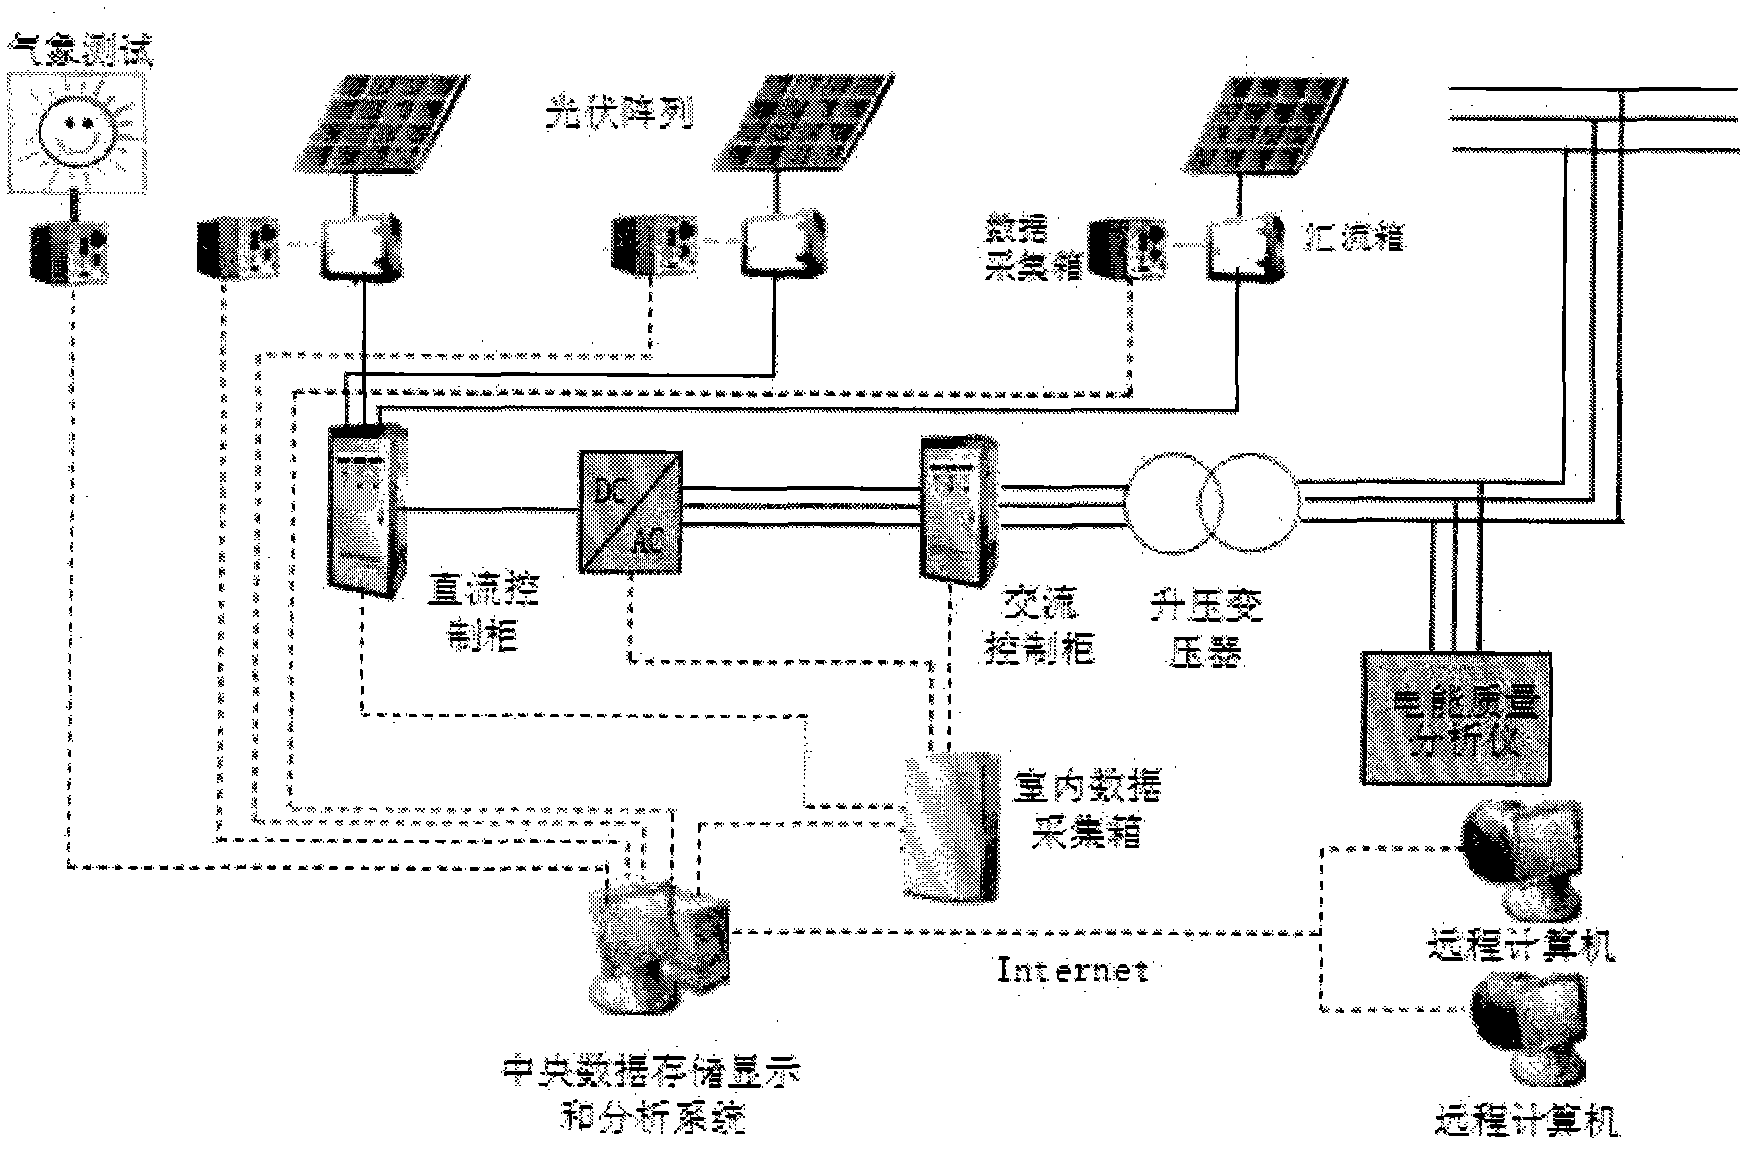 Grid-connected solar photovoltaic power station monitoring system